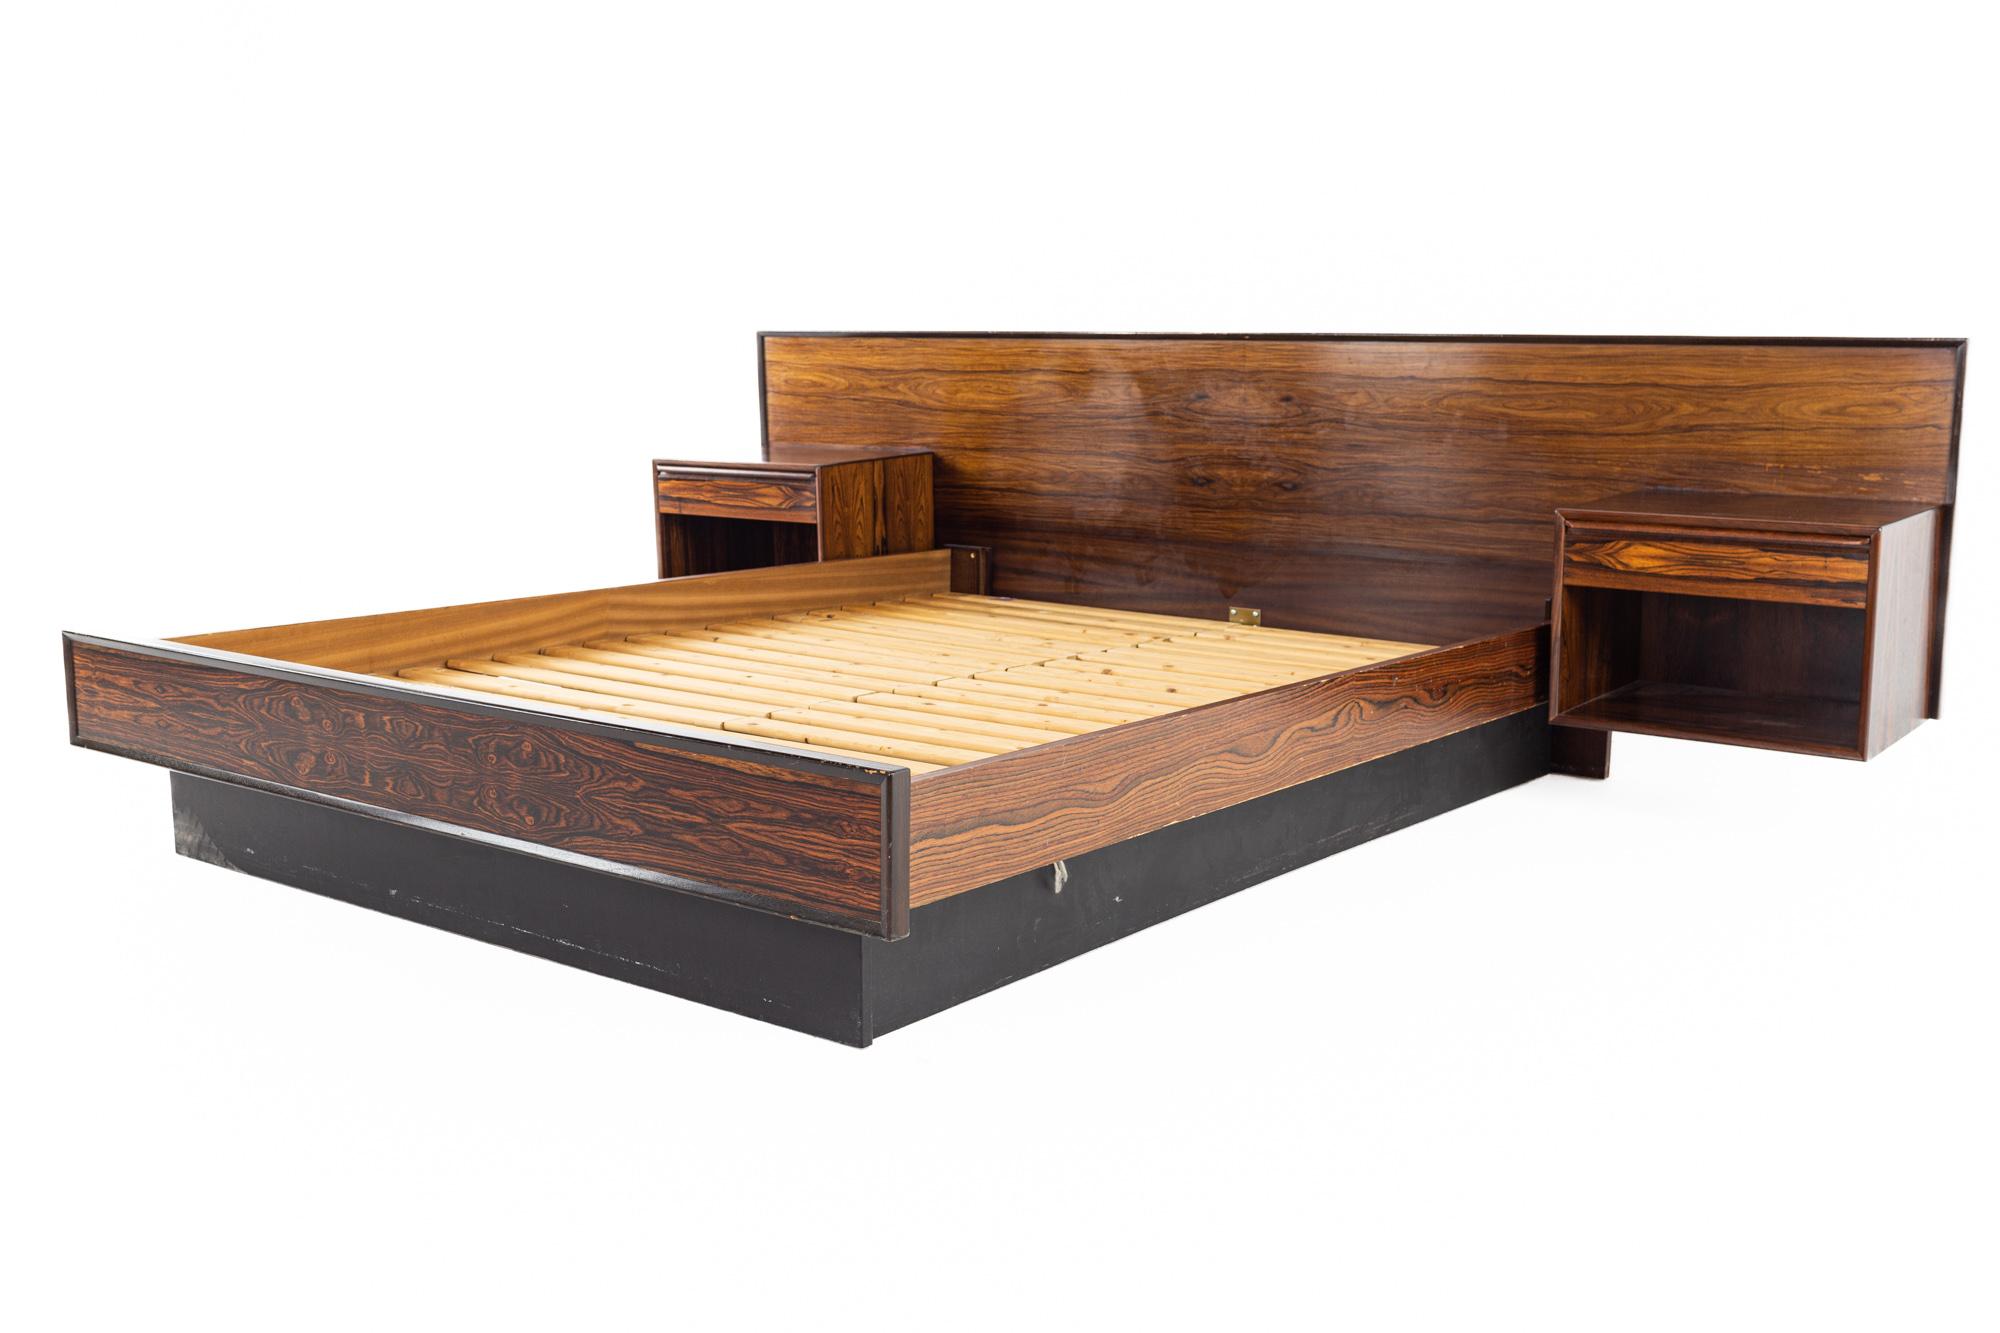 ikea platform bed with attached nightstands